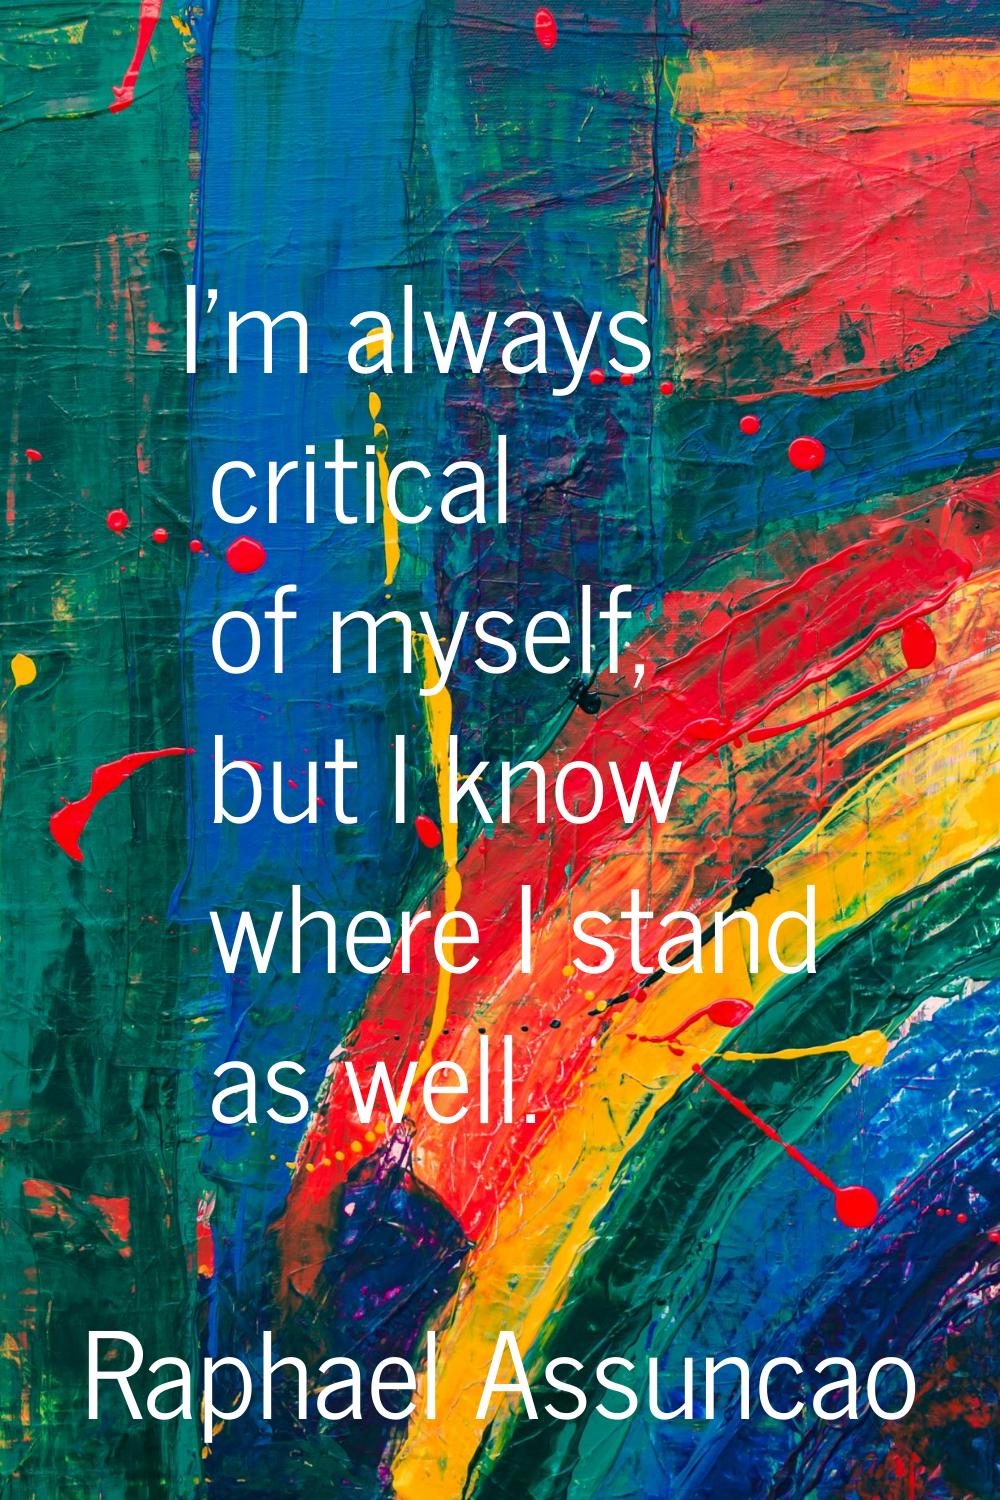 I'm always critical of myself, but I know where I stand as well.